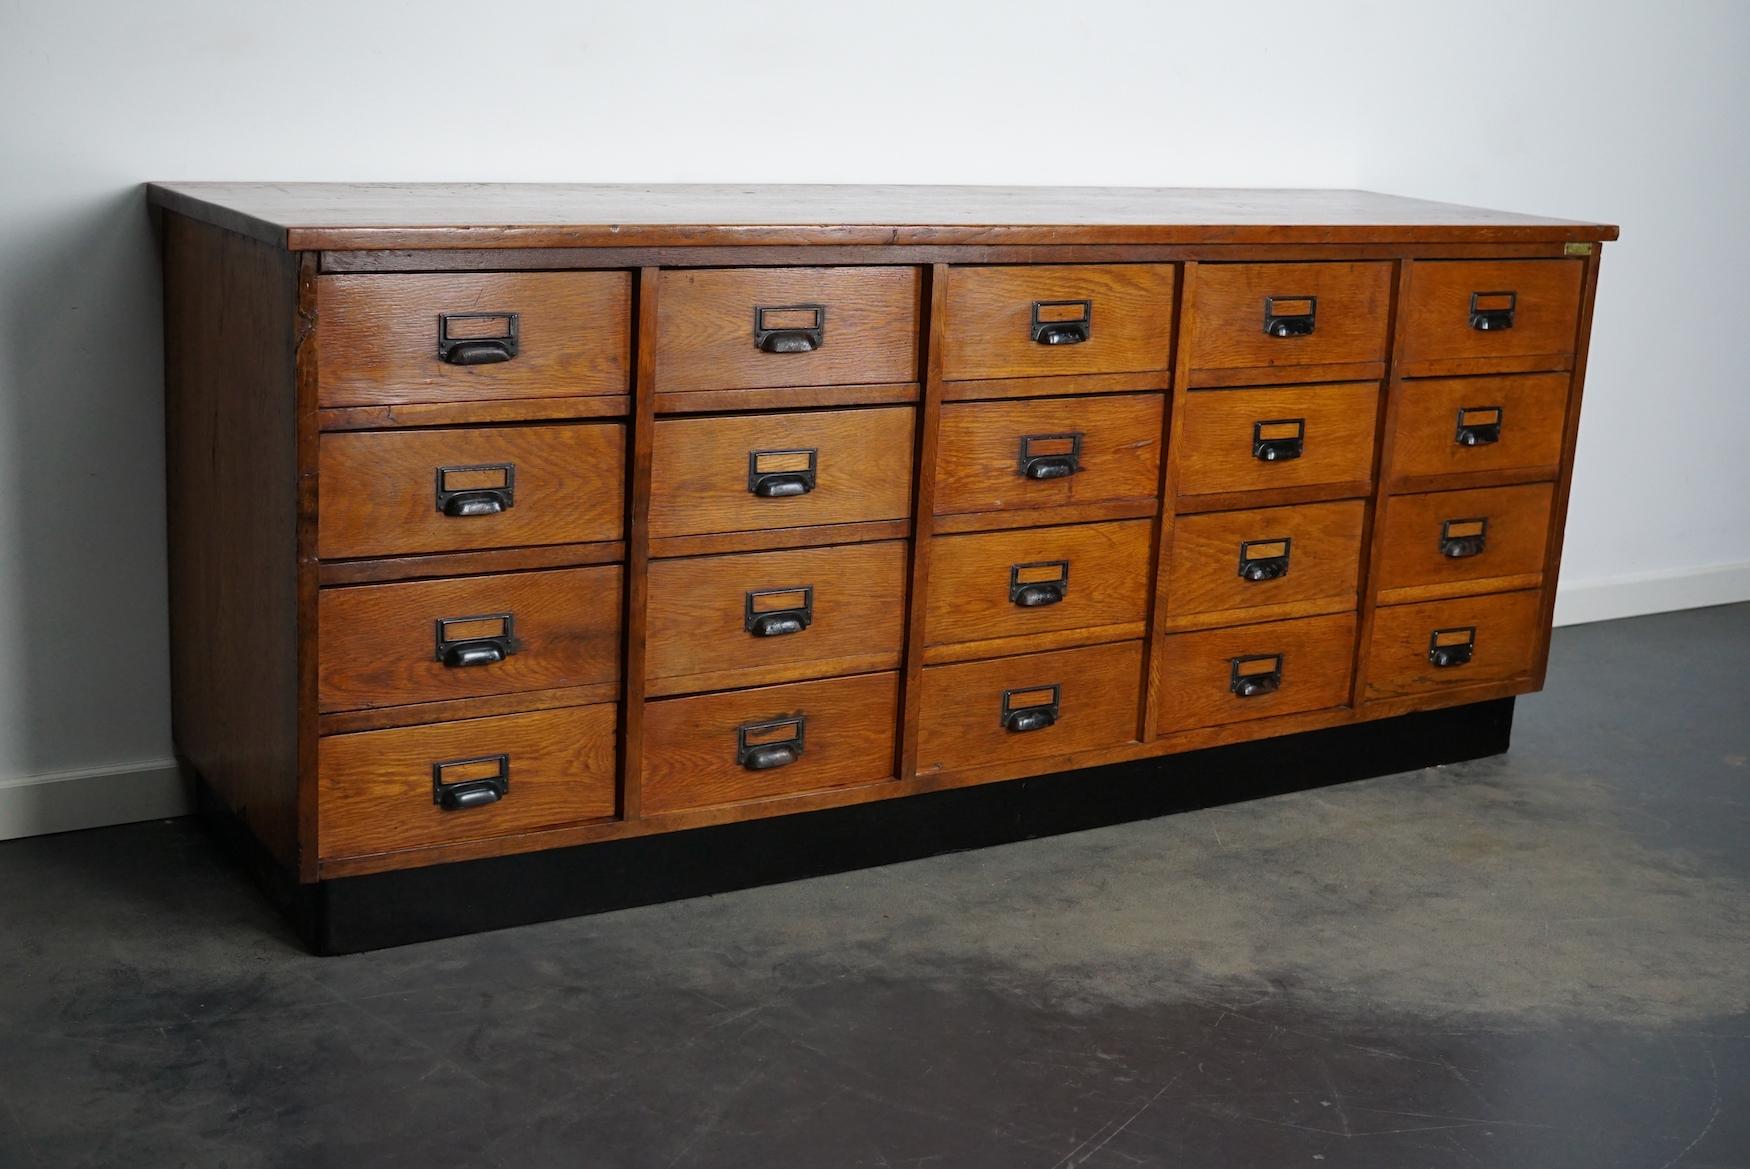 This apothecary cabinet was designed and made from oak ply, pine and hardwood circa 1950 in Germany. It features 20 drawers with black metal hardware. The inside of the drawers measure: DWH 44 x 30 x 11 cm.